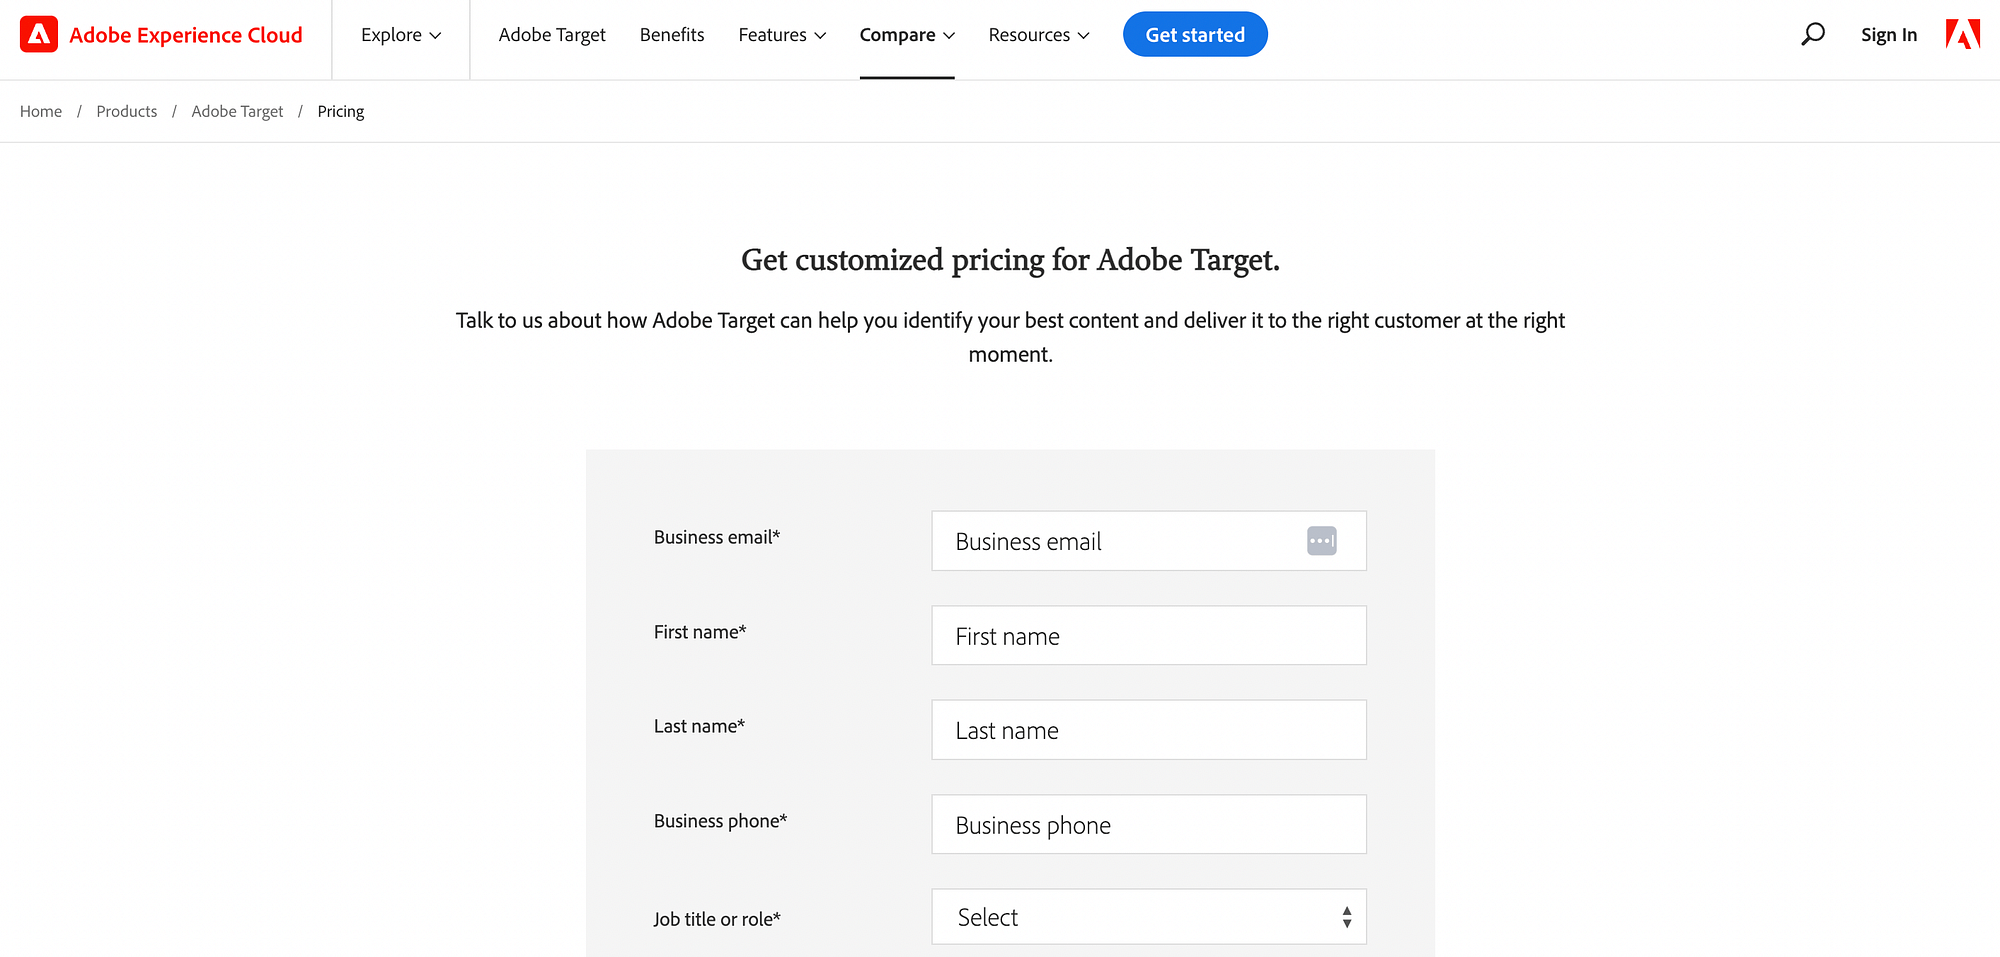 Get a custom quote for Adobe Target